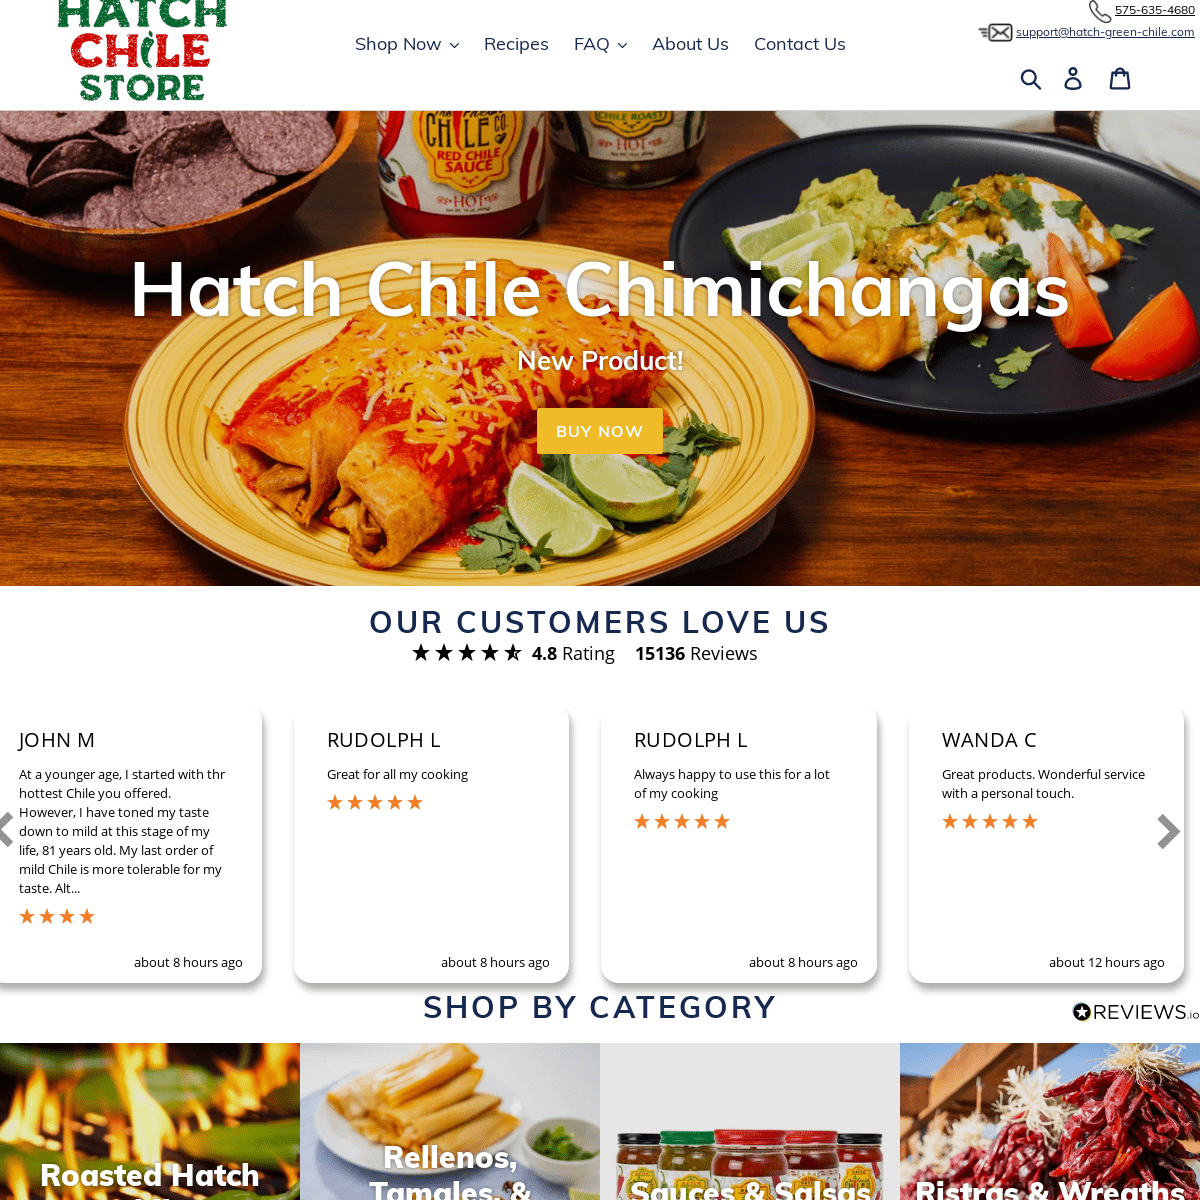 A complete backup of https://hatch-green-chile.com